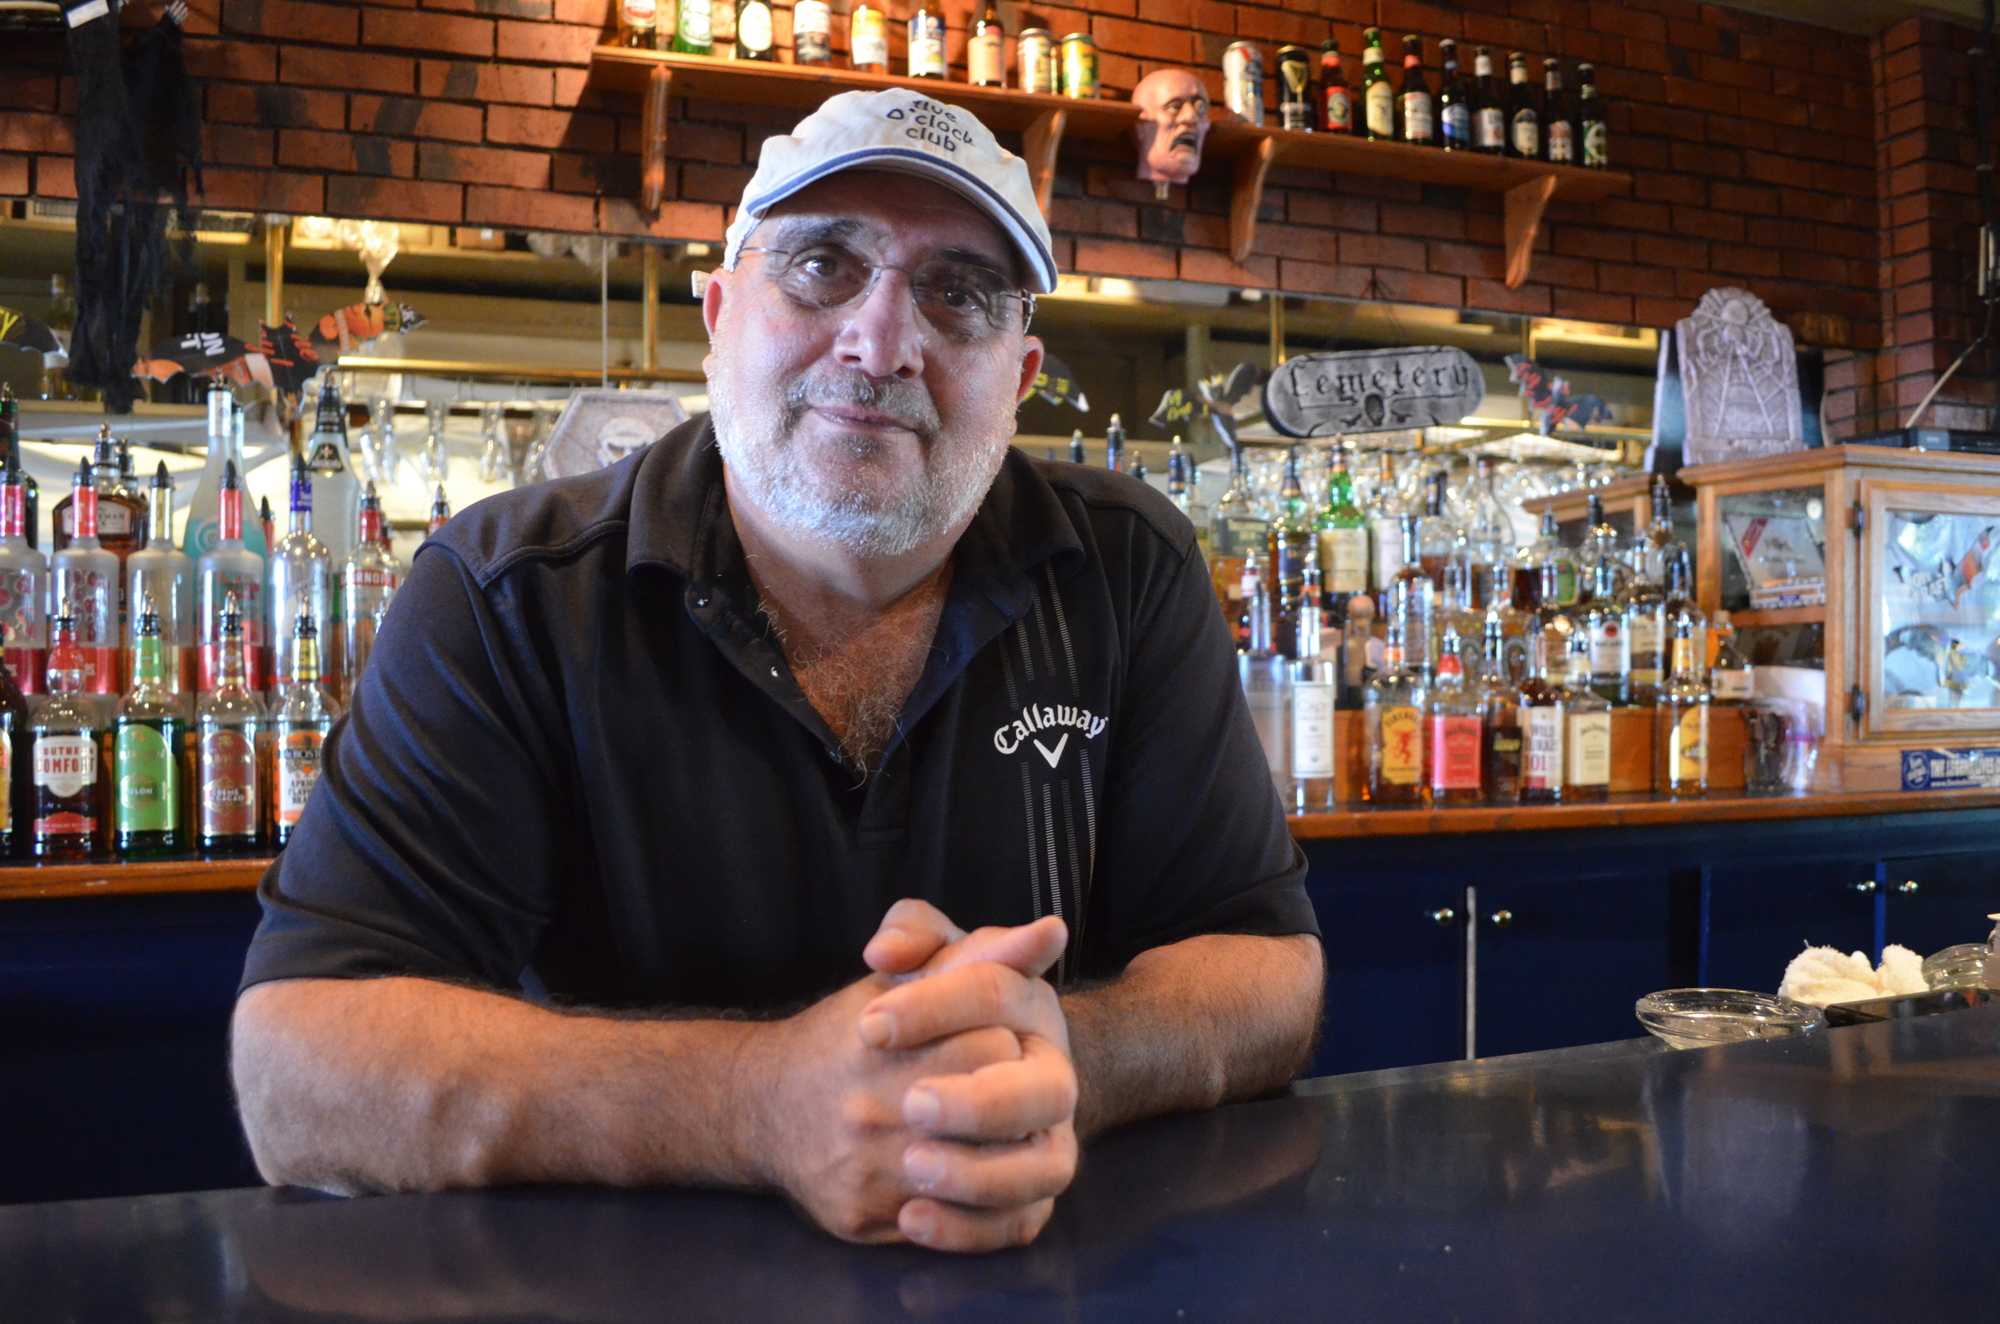 George Generoso hopes to embrace a new image at the Five O'Clock Club.